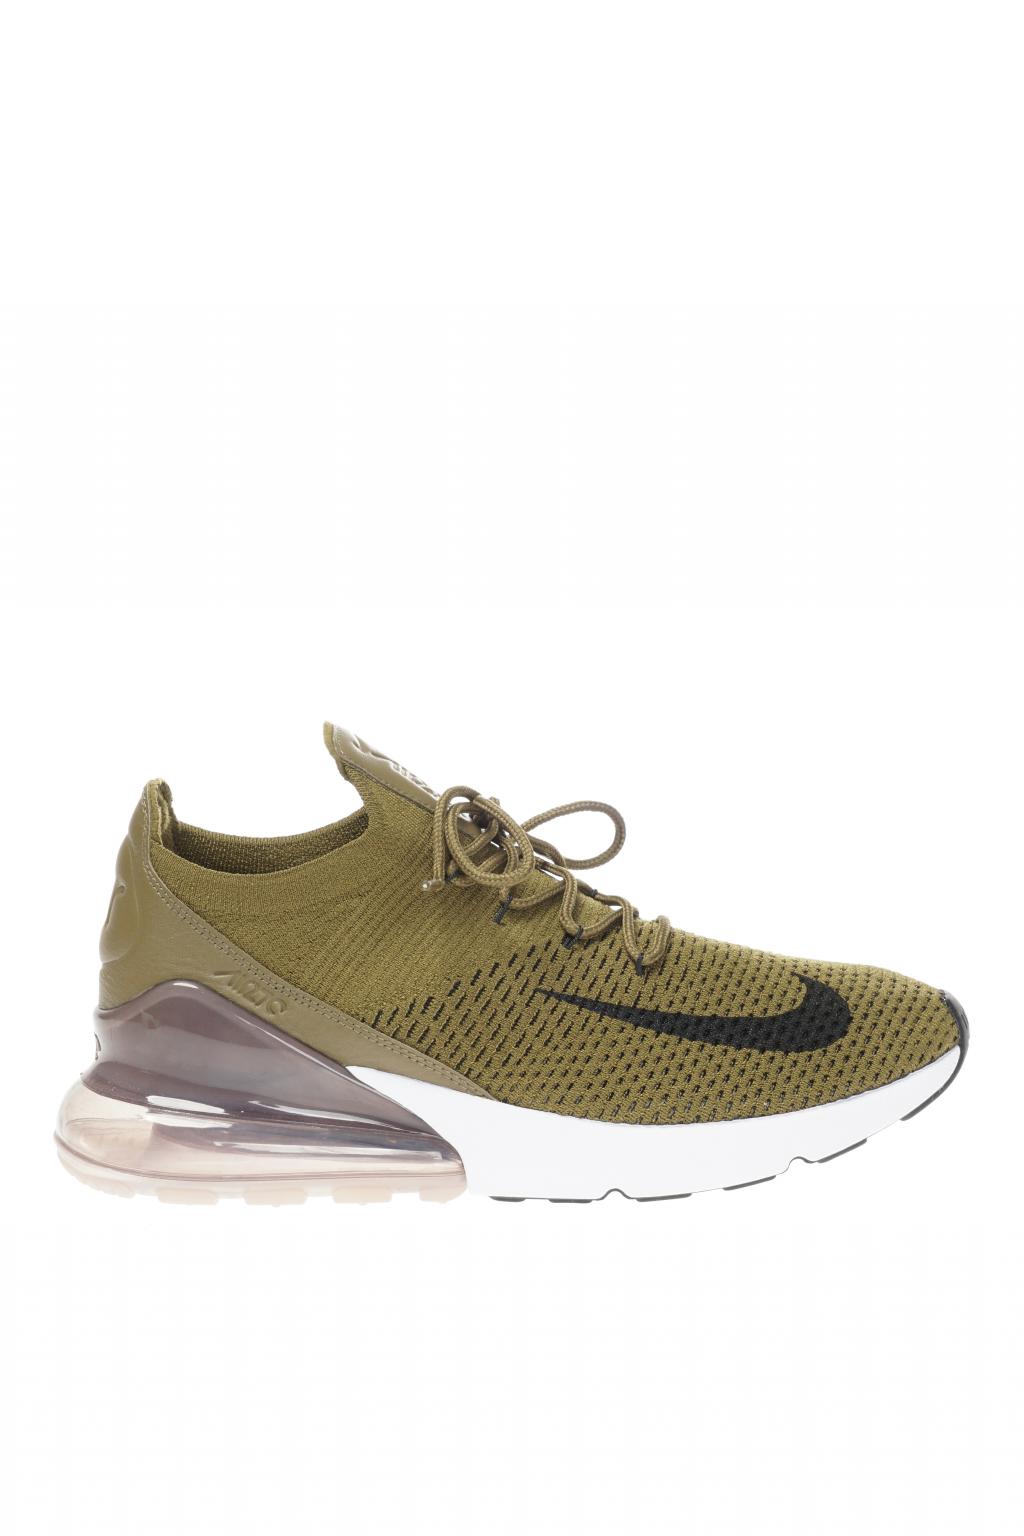 nike air max 270 flyknit womens olive